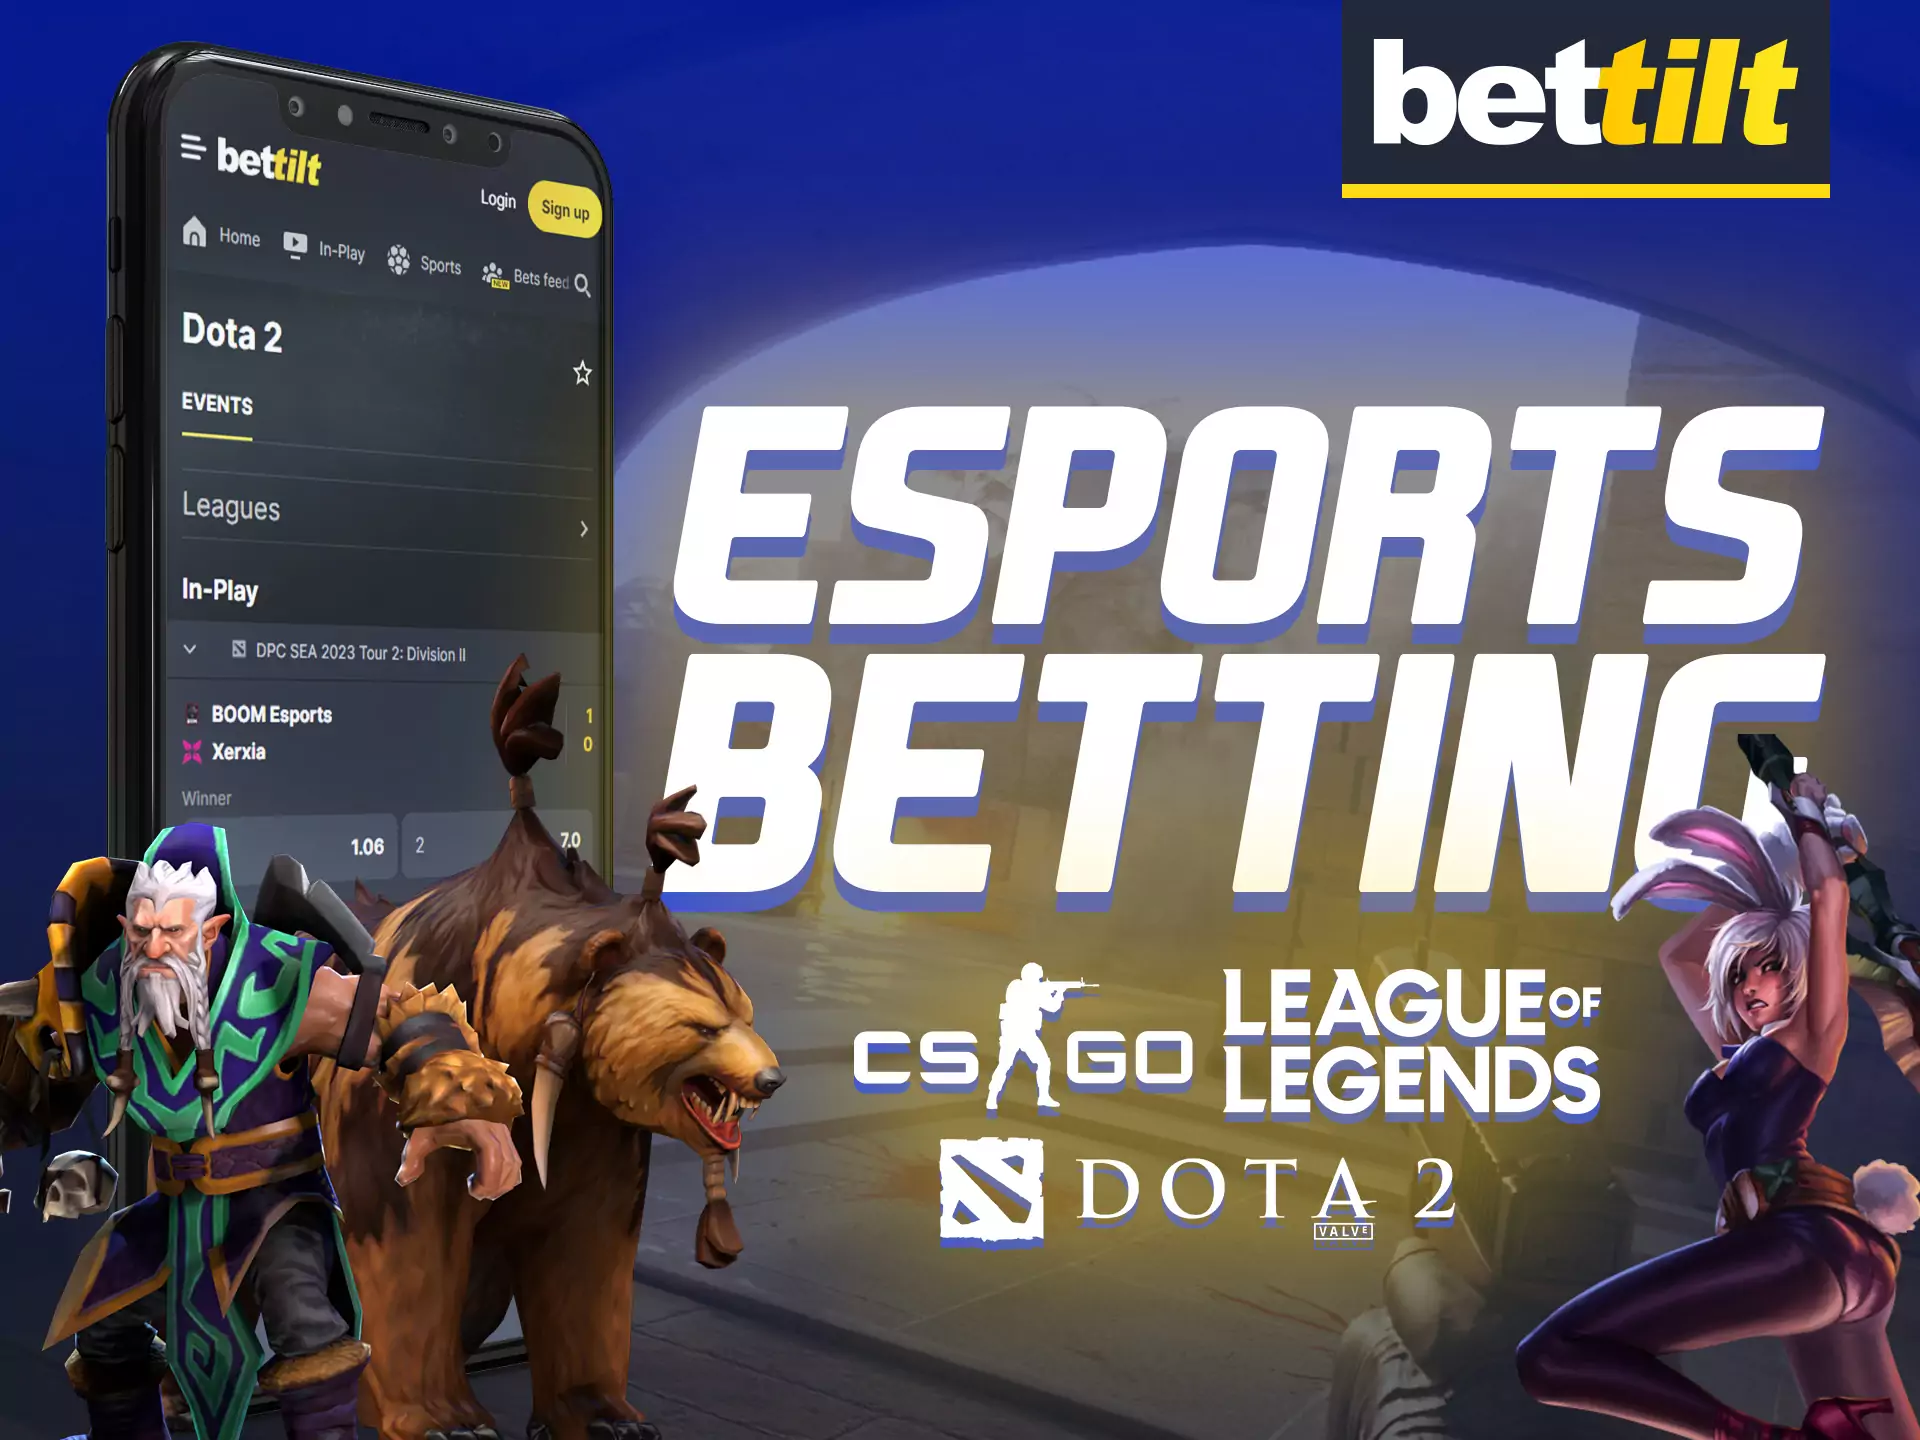 In the Bettilt app you can bet on esports.